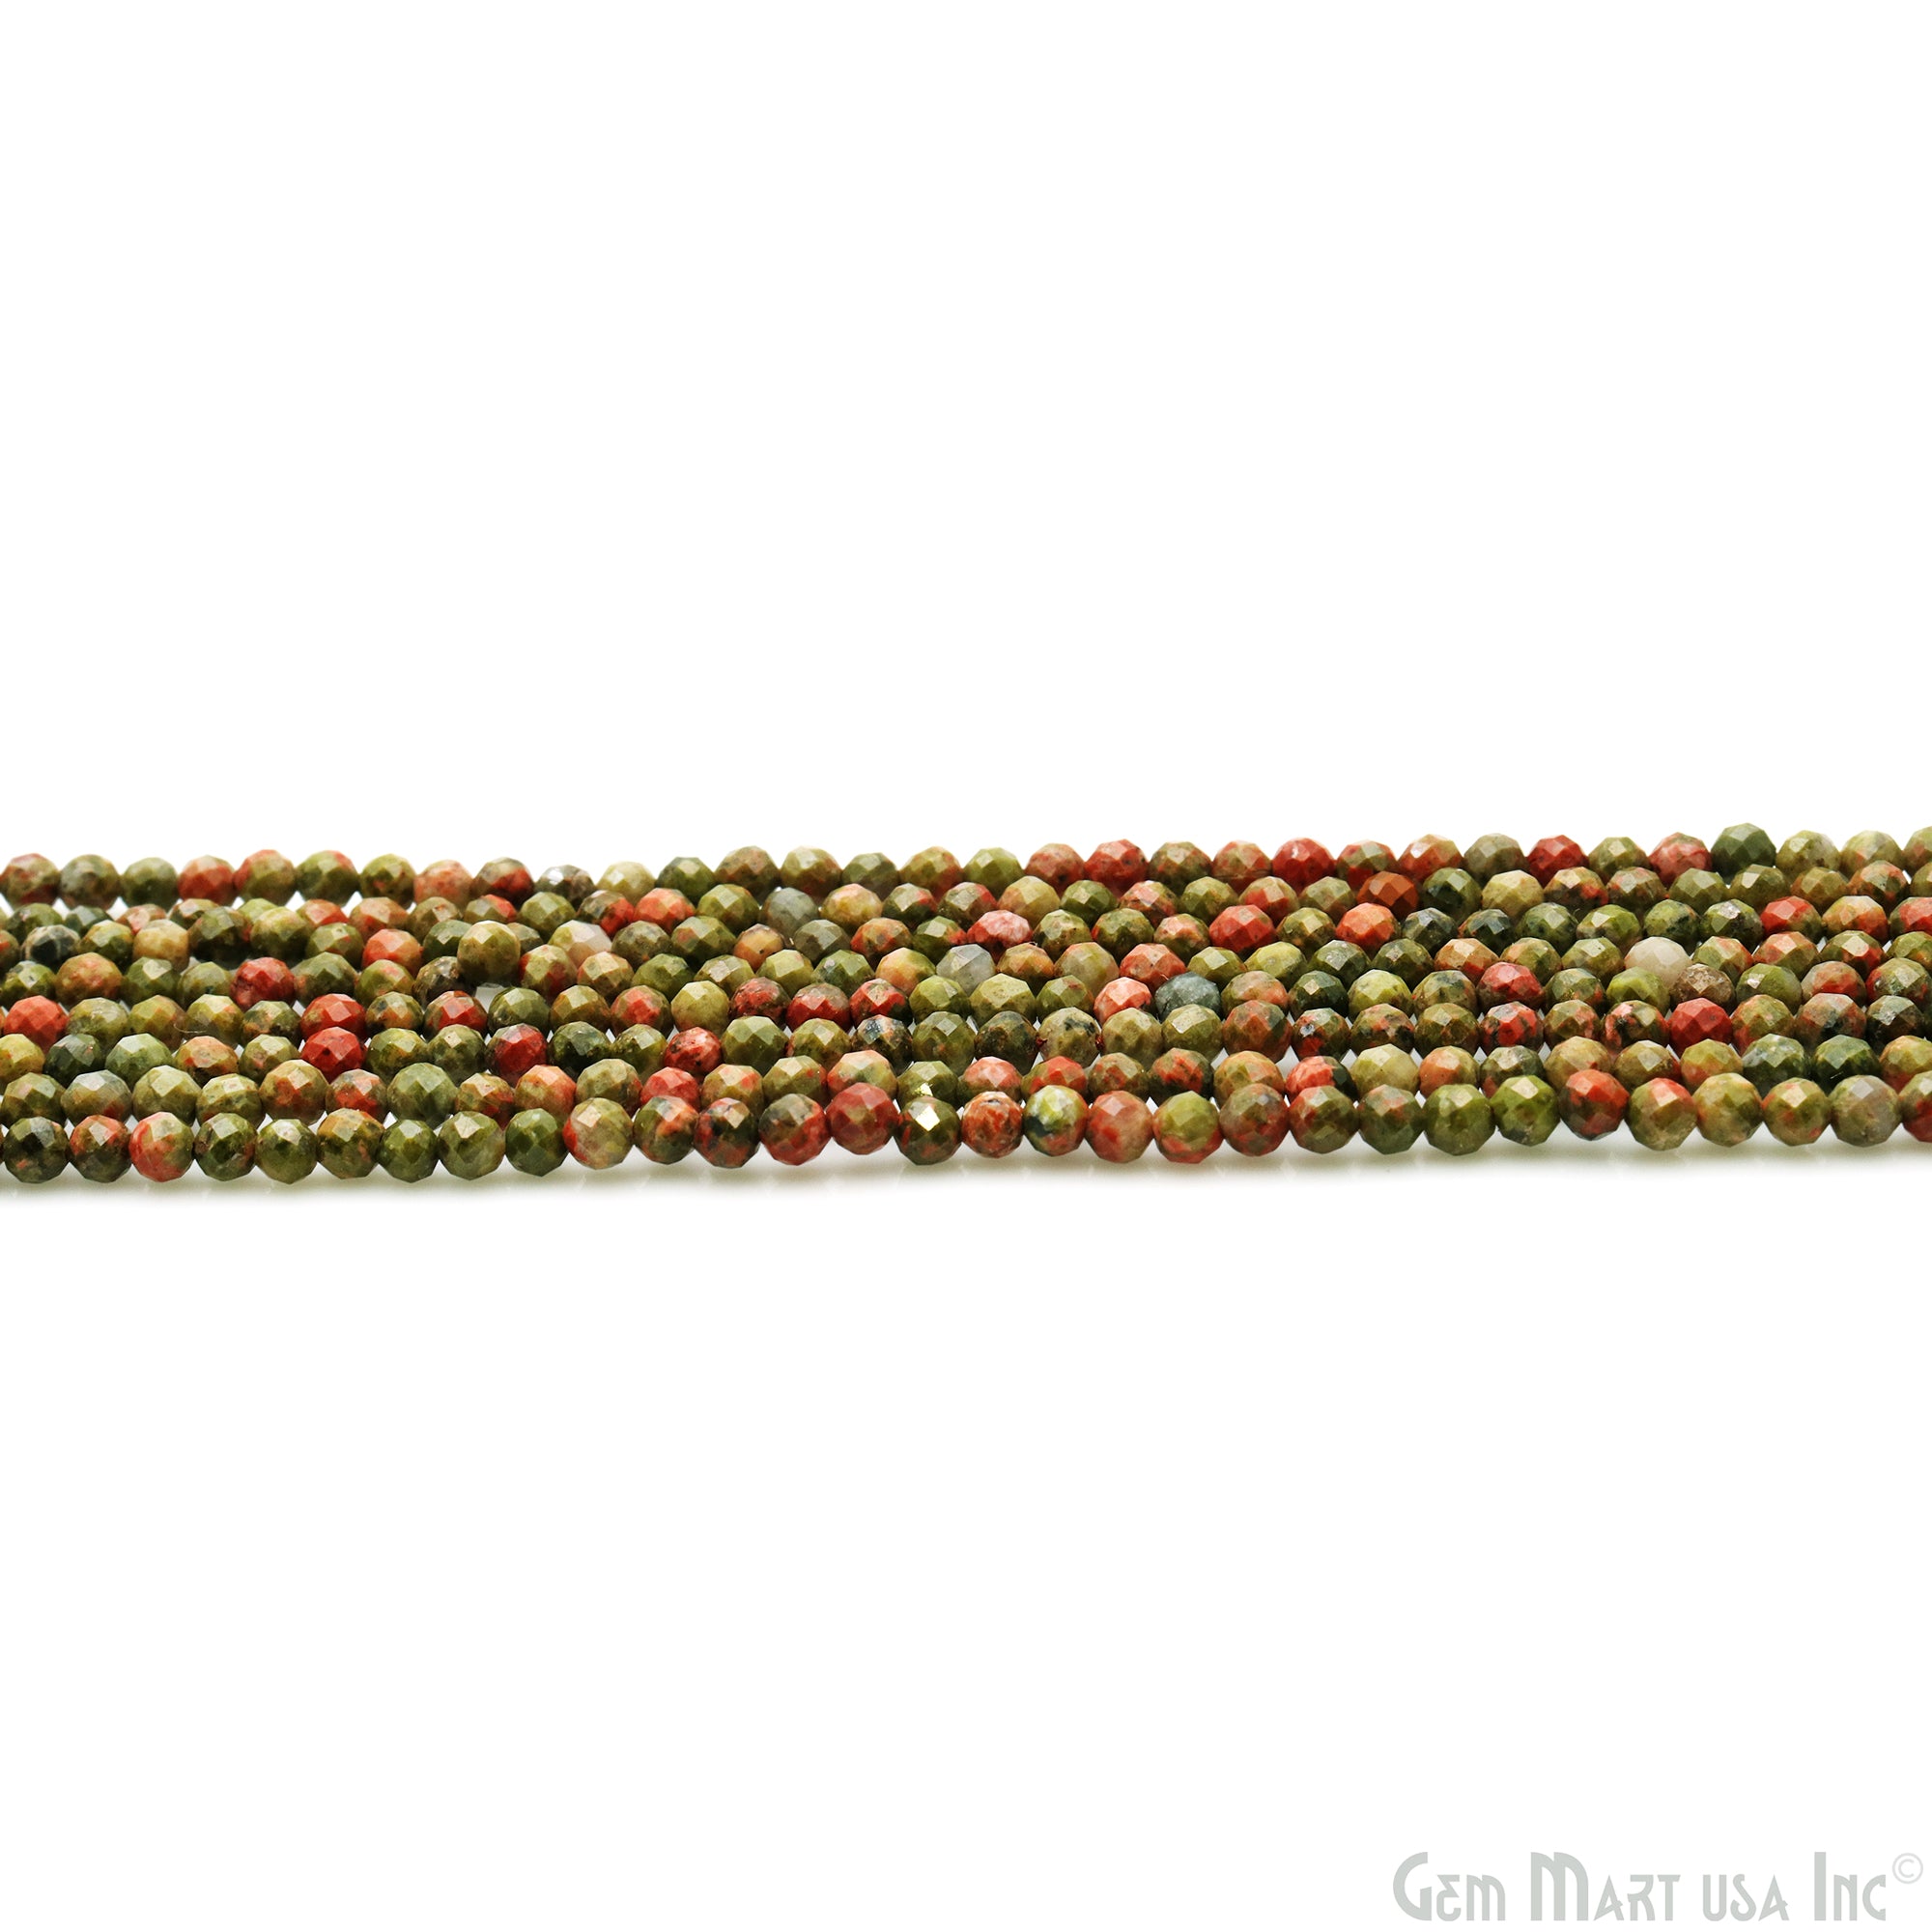 Unakite Faceted 3mm Gemstone Rondelle Beads 1 Strand